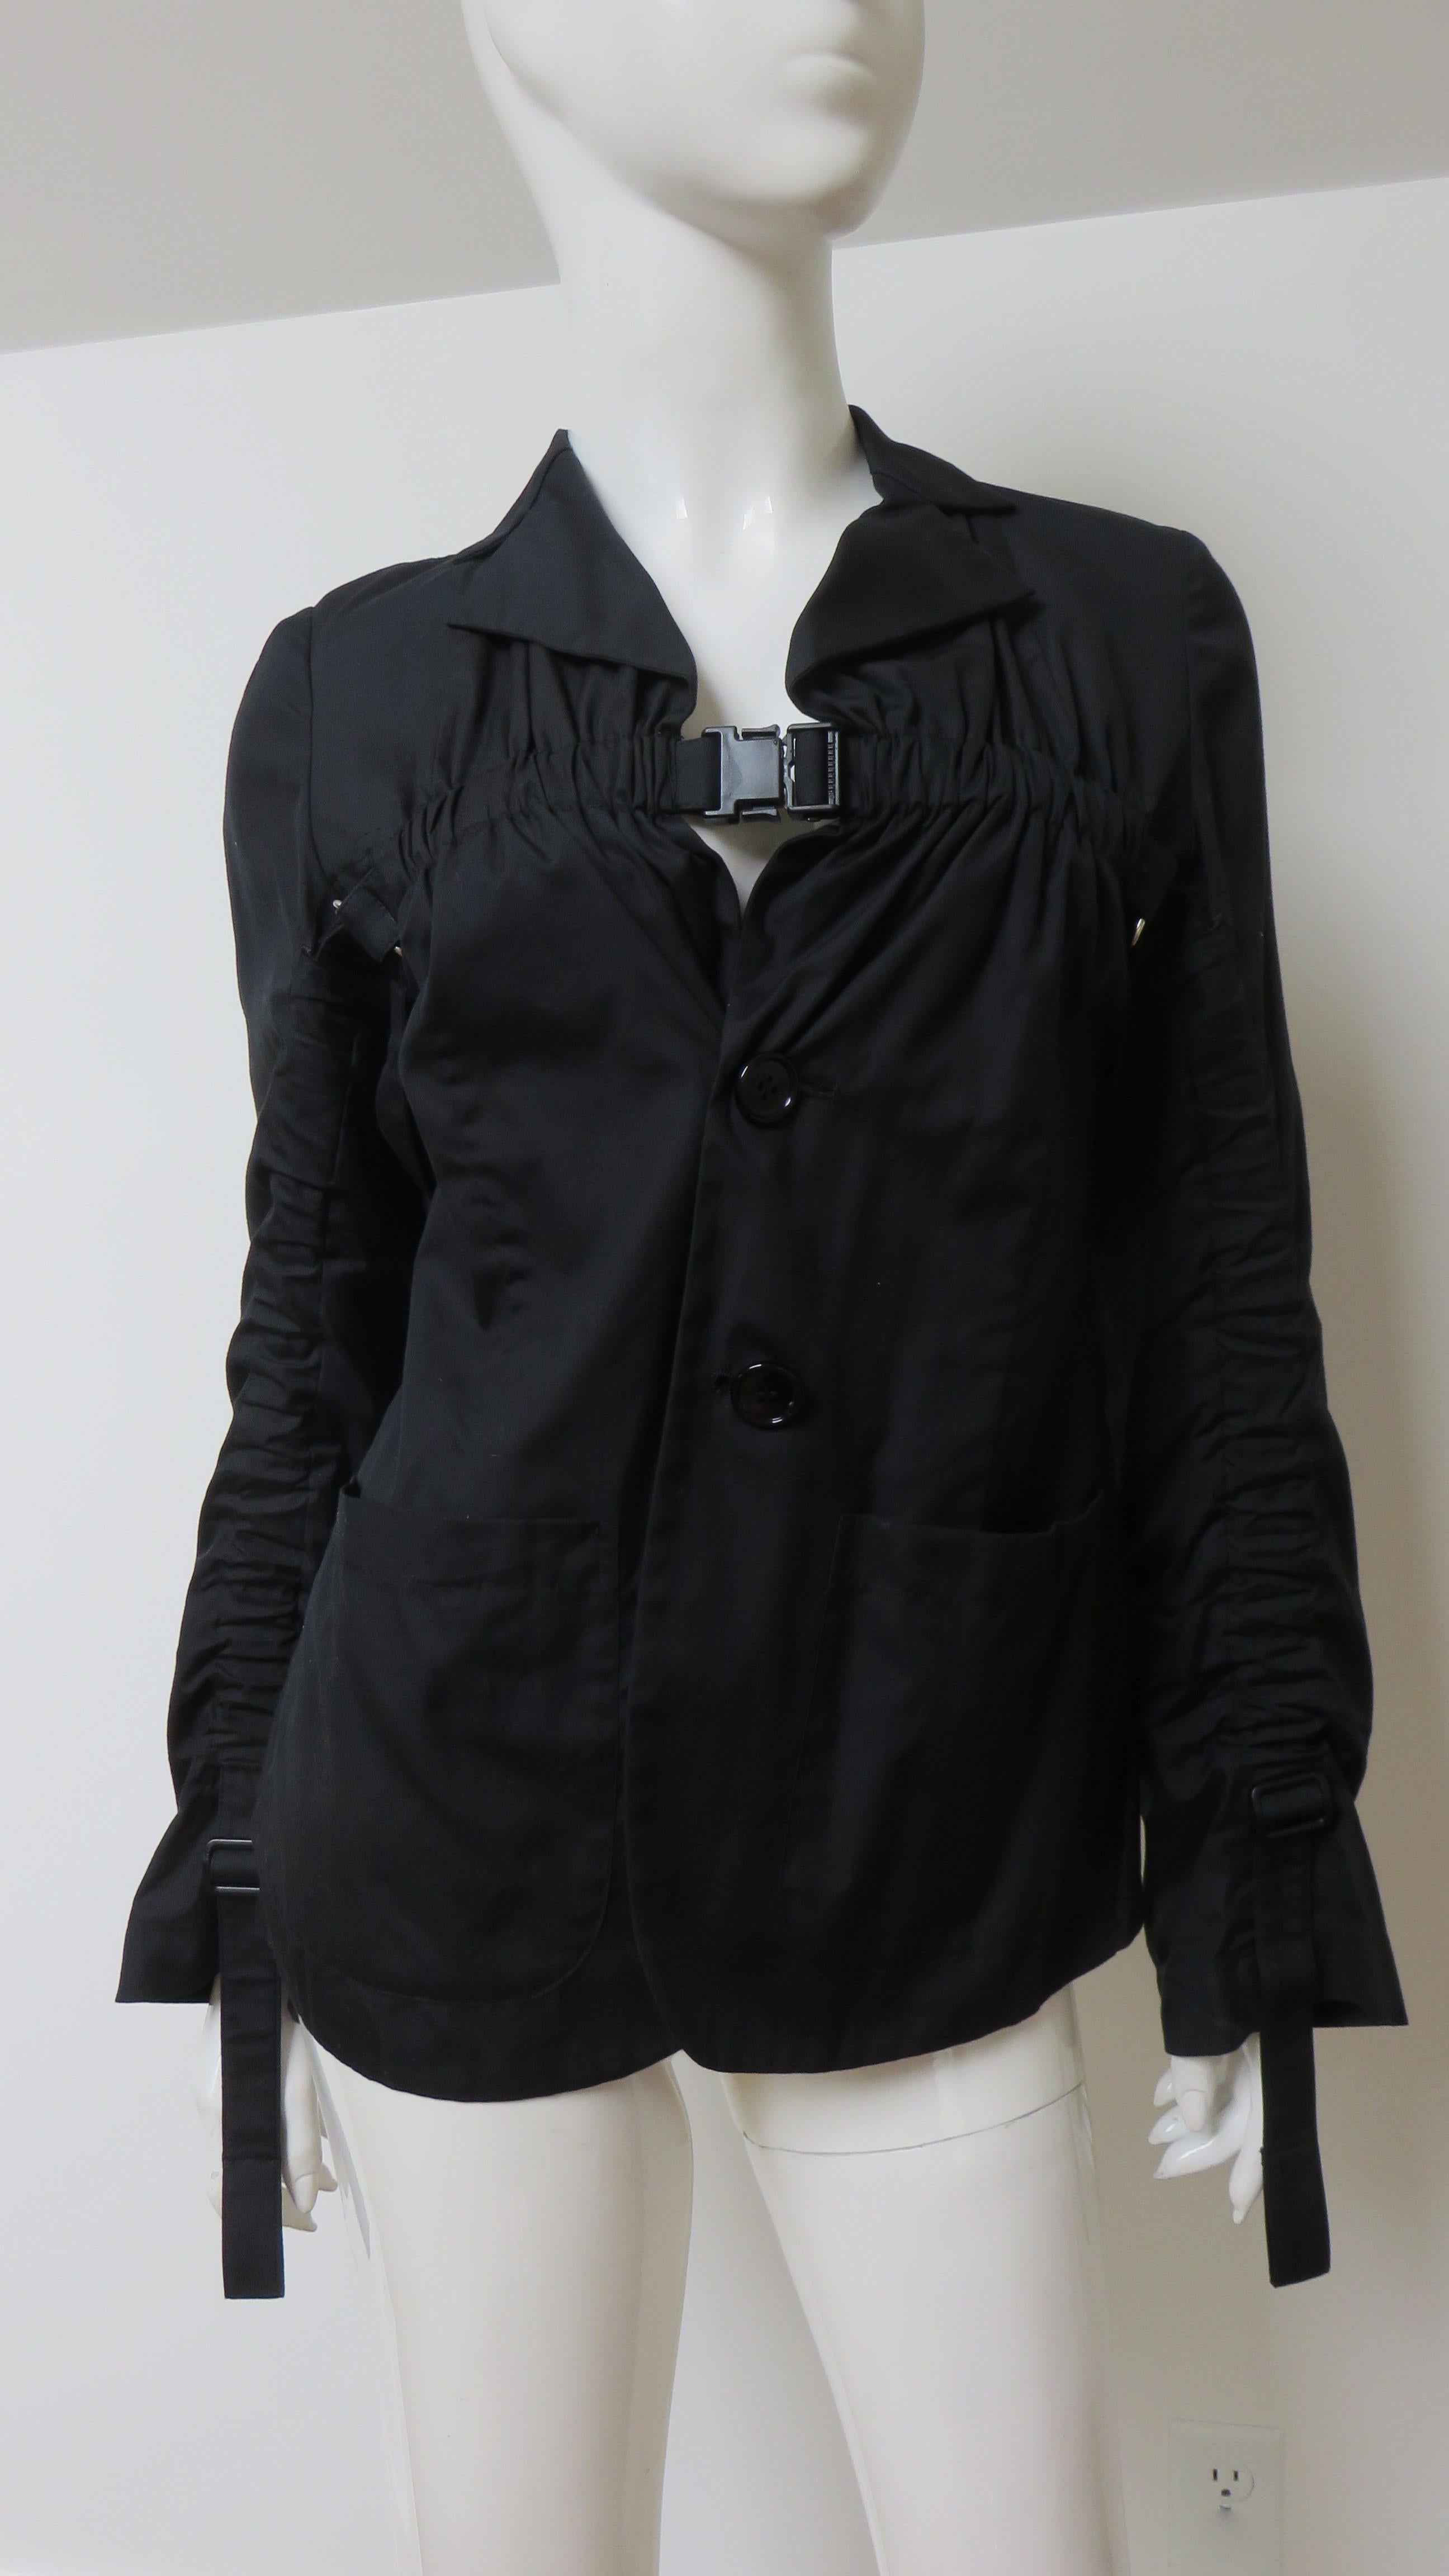  Comme des Garcons AD 2002 Bondage Top and Jacket In Good Condition For Sale In Water Mill, NY